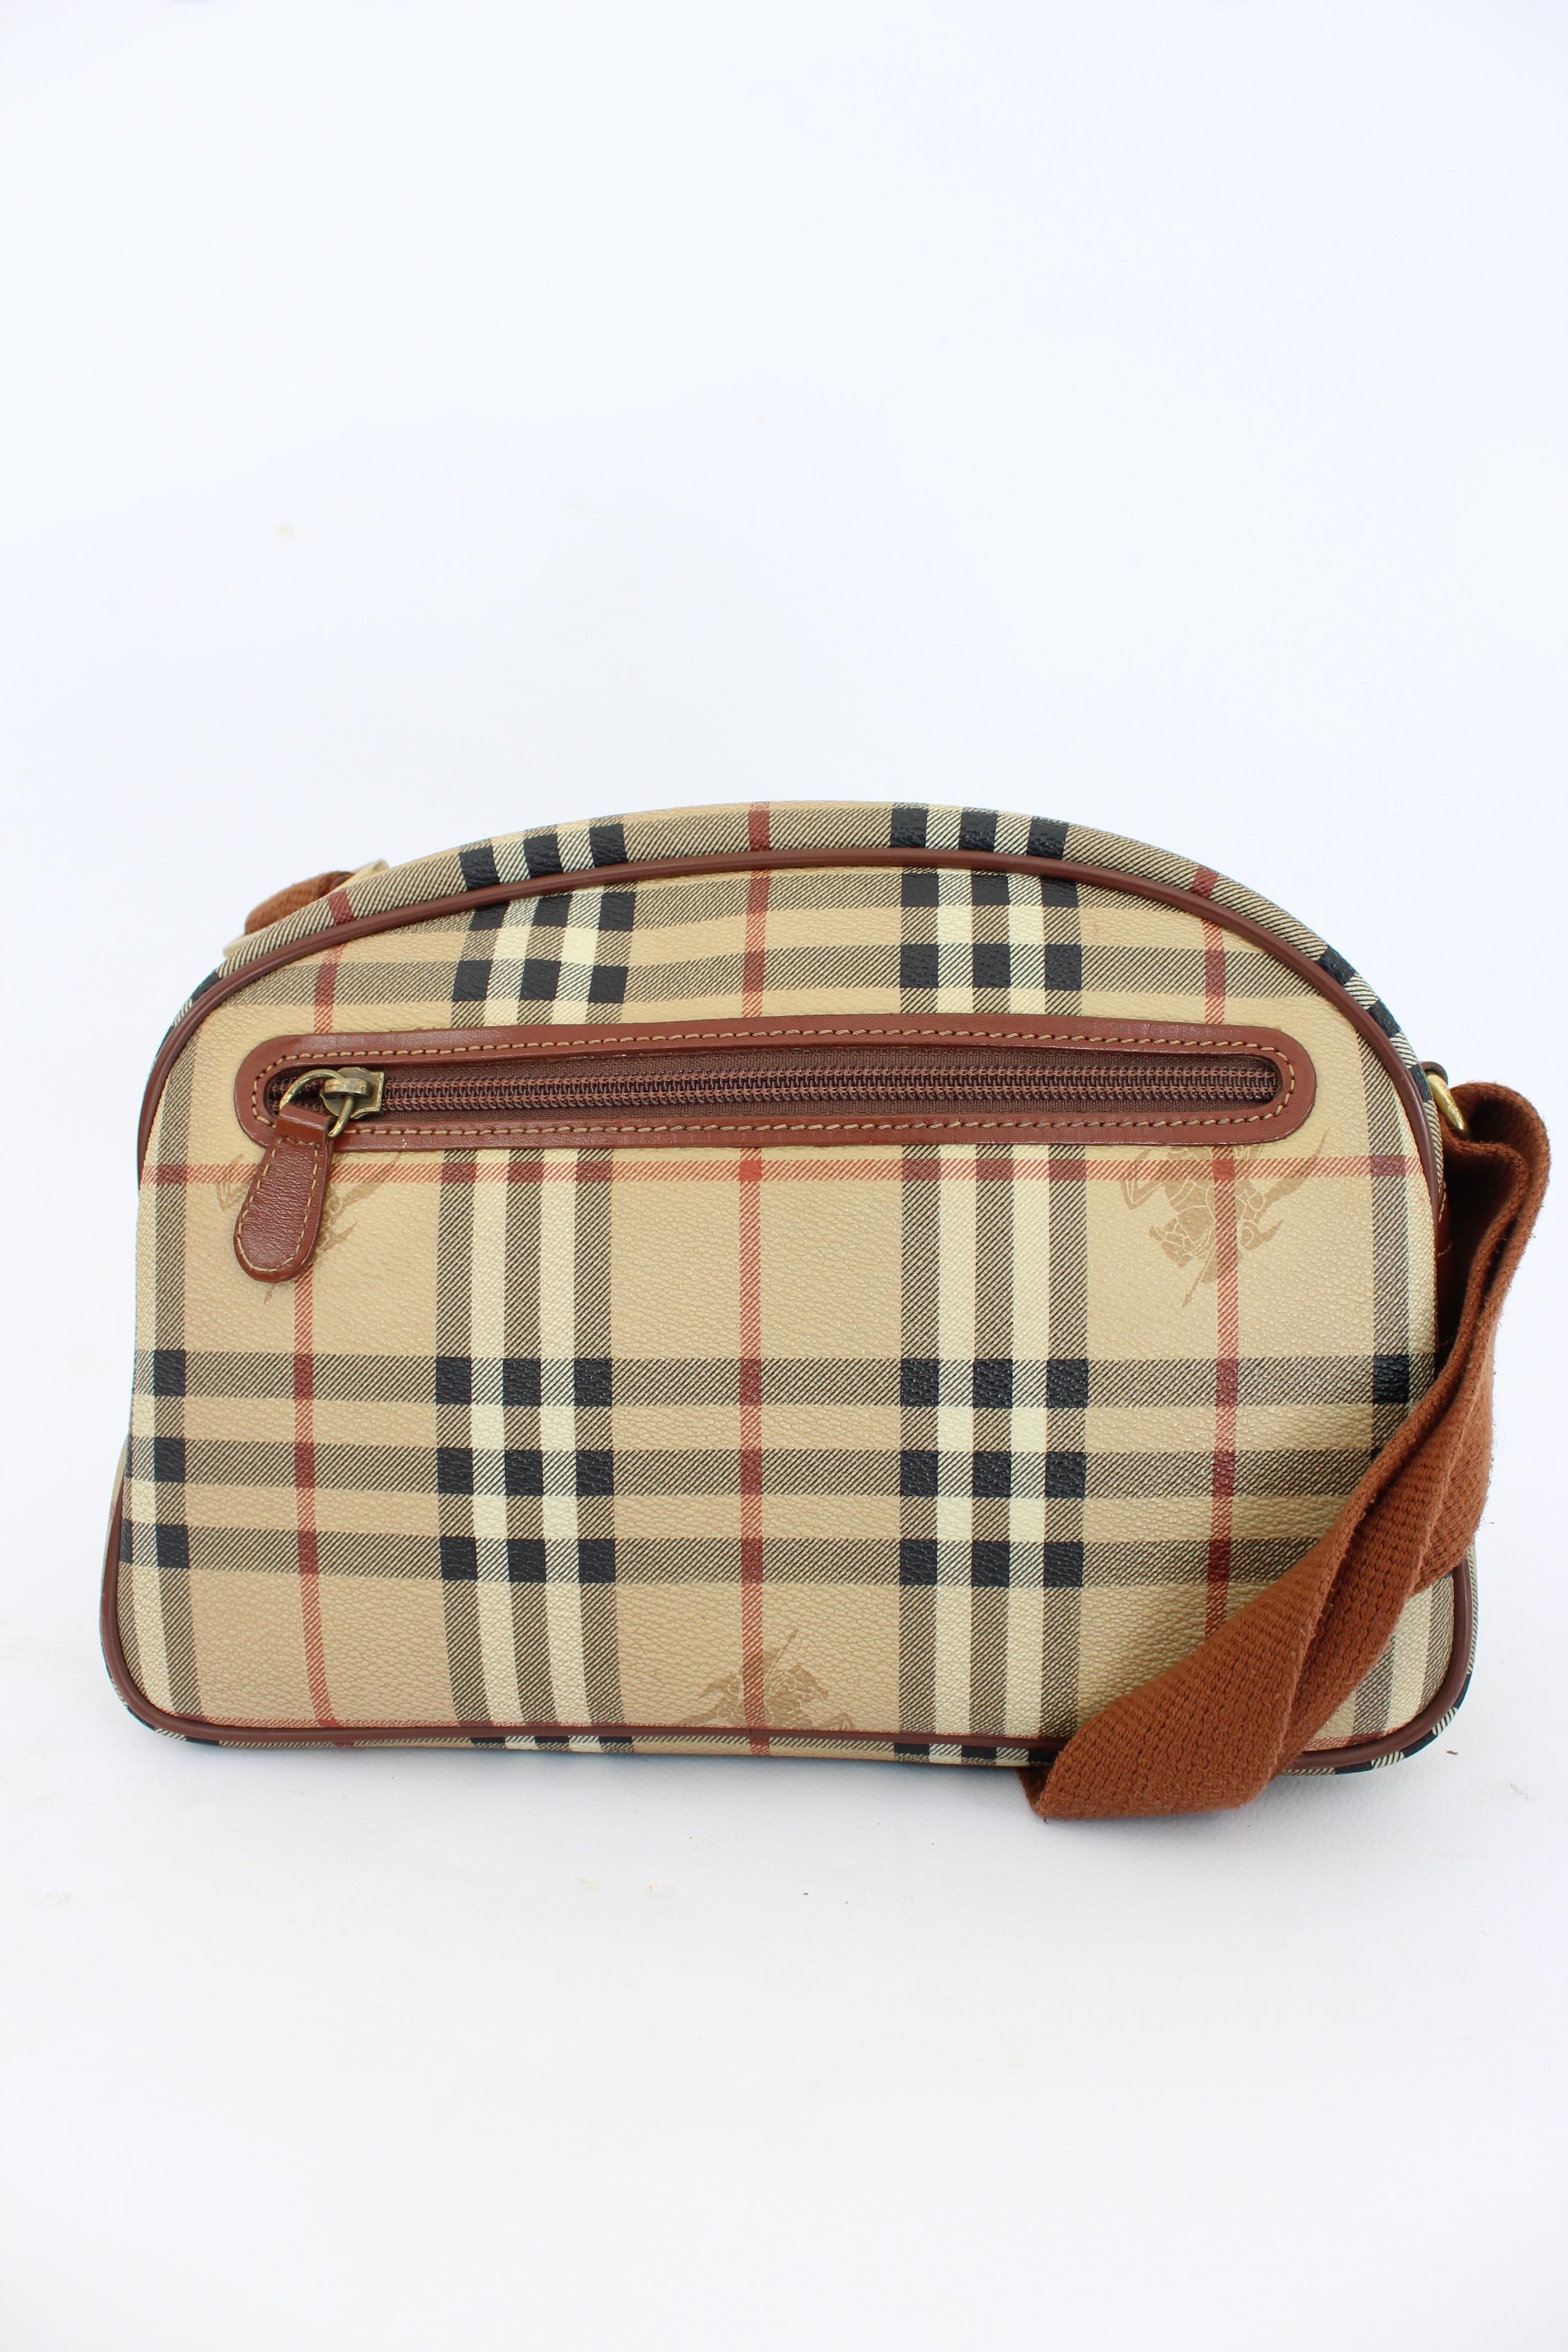 Burberry vintage 80s bag. Satchel model shoulder bag, beige and brown with typical Burberry check pattern. Two rectangular pockets on the front with clip closure and one on the back with zip. Adjustable shoulder strap, canvas fabric and leather.